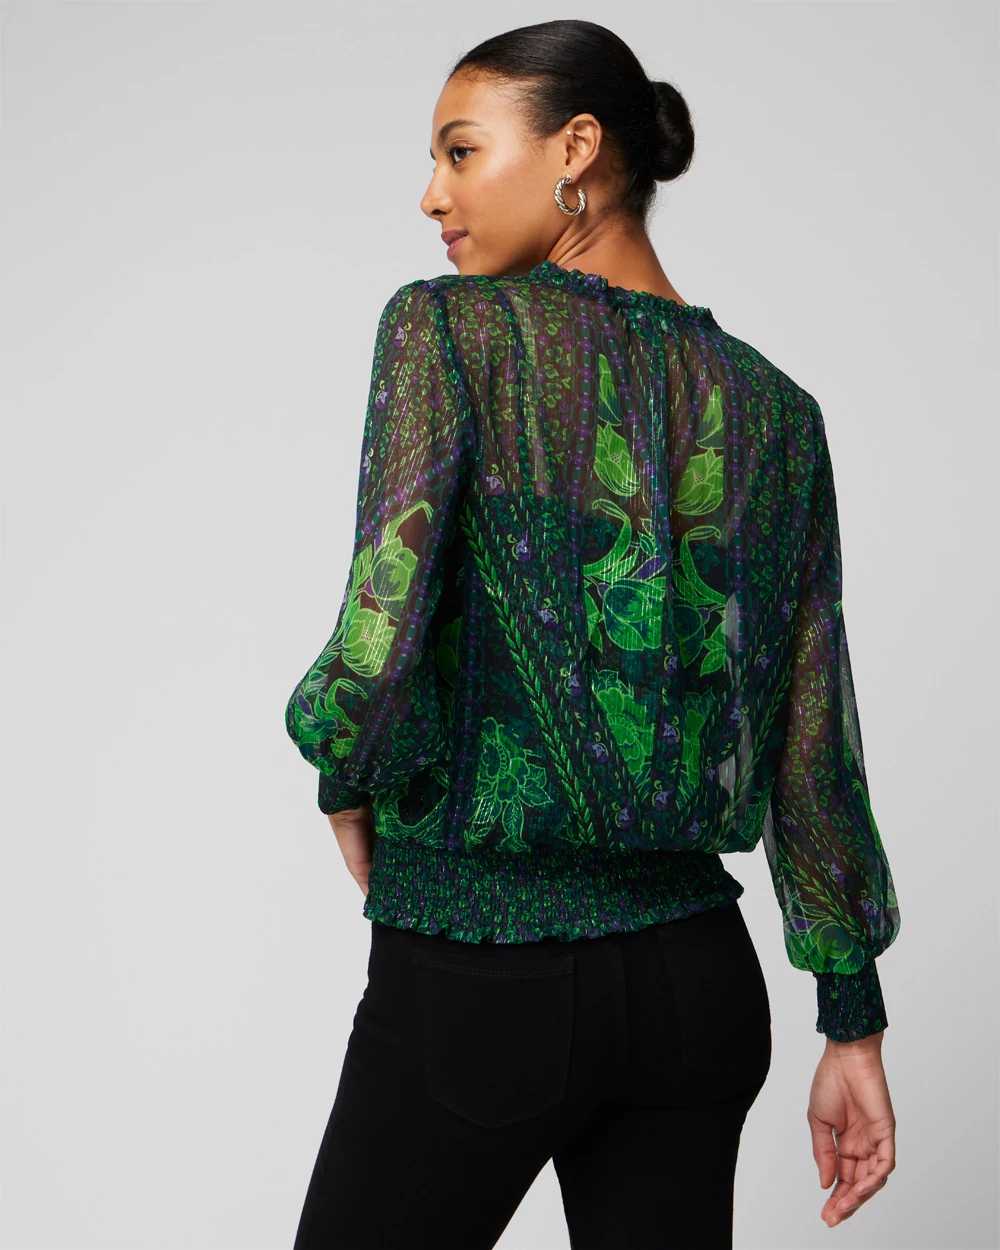 Long Sleeve Mixed Print Lurex Blouse click to view larger image.